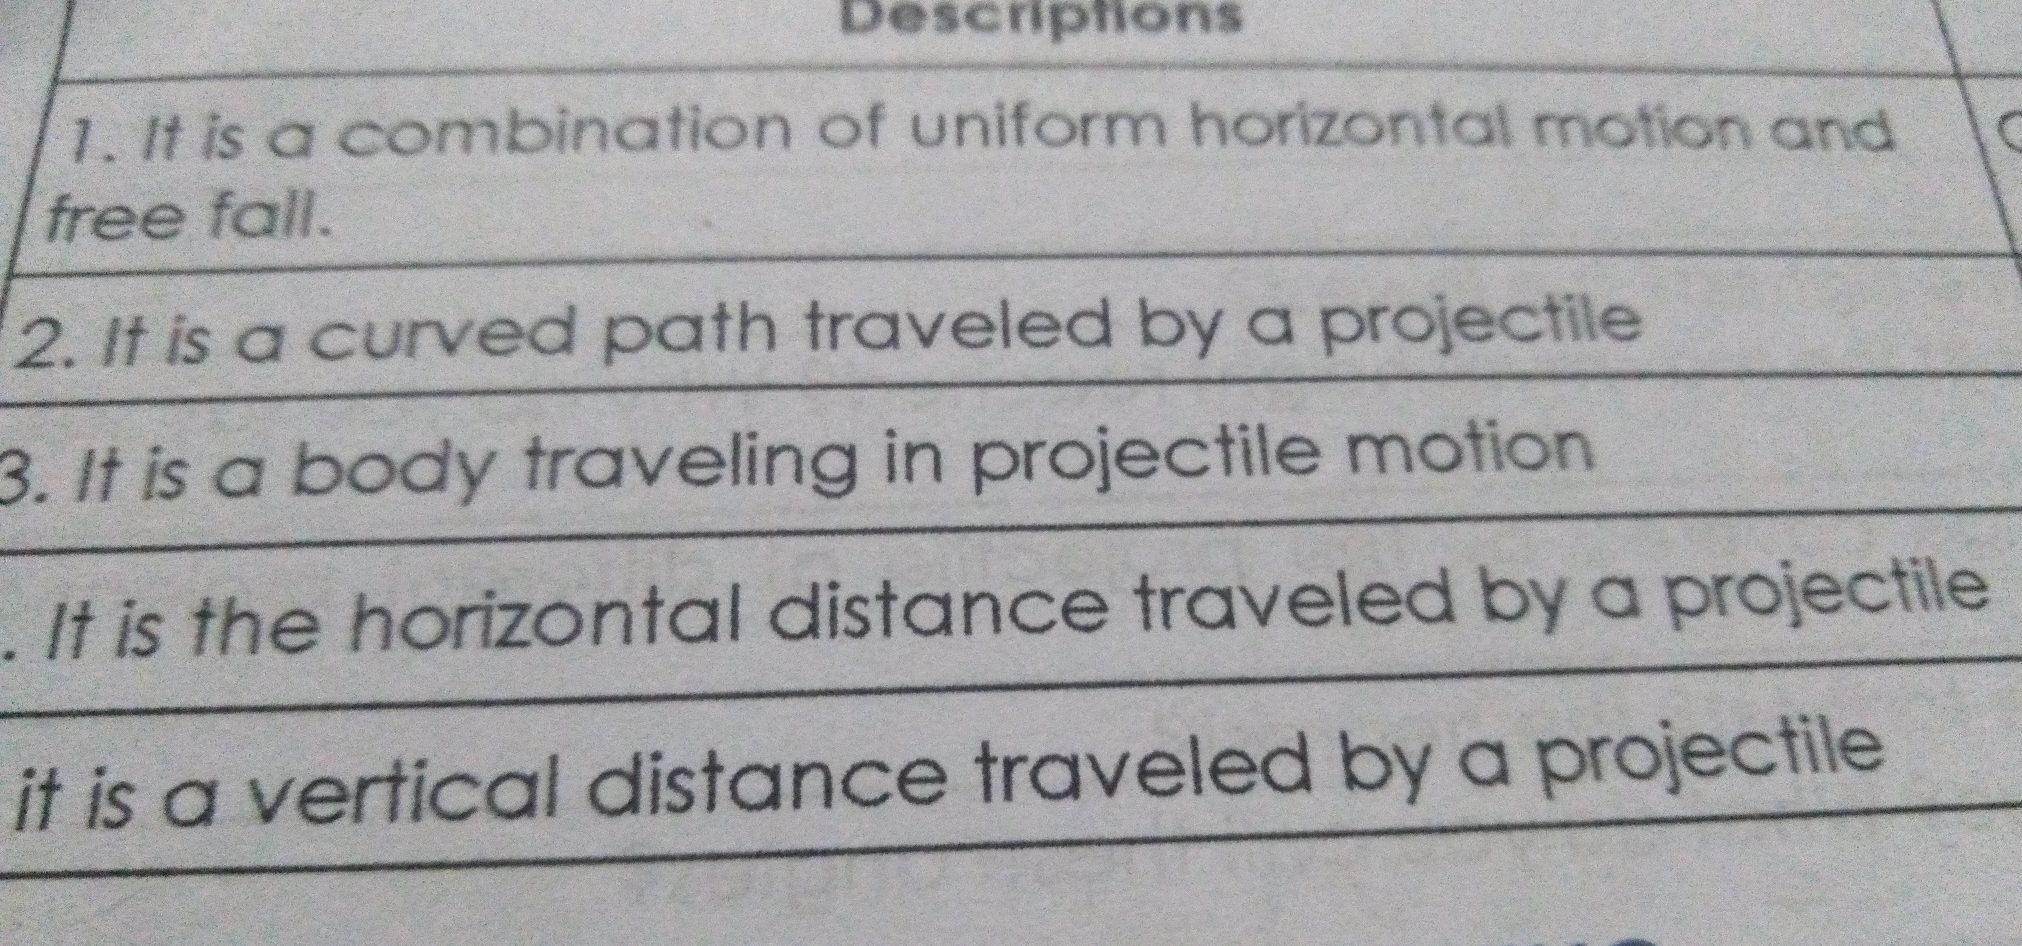 Descriptions 1. It is a combination of uniform horizontal motion and free fall. 2. It is a curved path traveled by a projectile 3. It is a body traveling in projectile motion . It is the horizontal distance traveled by a projectile it is a vertical distance traveled by a projectile